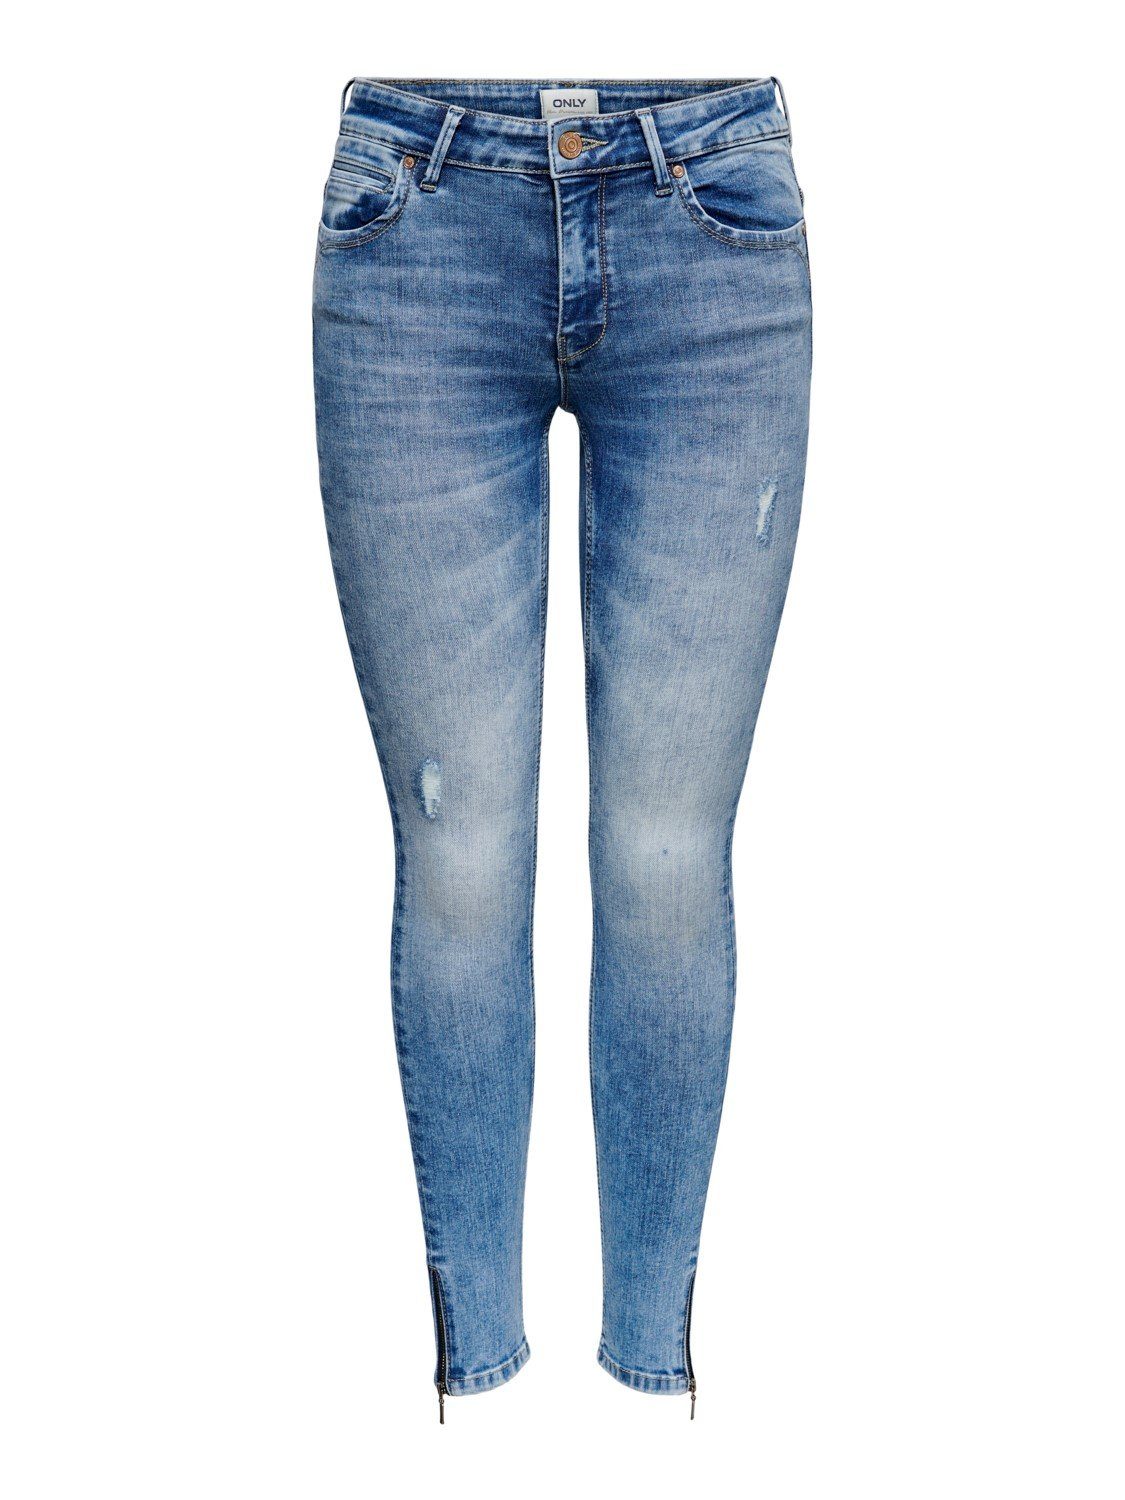 ONLY Skinny-fit-Jeans ONLKENDELL LIFE REG SK ANK TAI006 mit Stretch | Stretchjeans